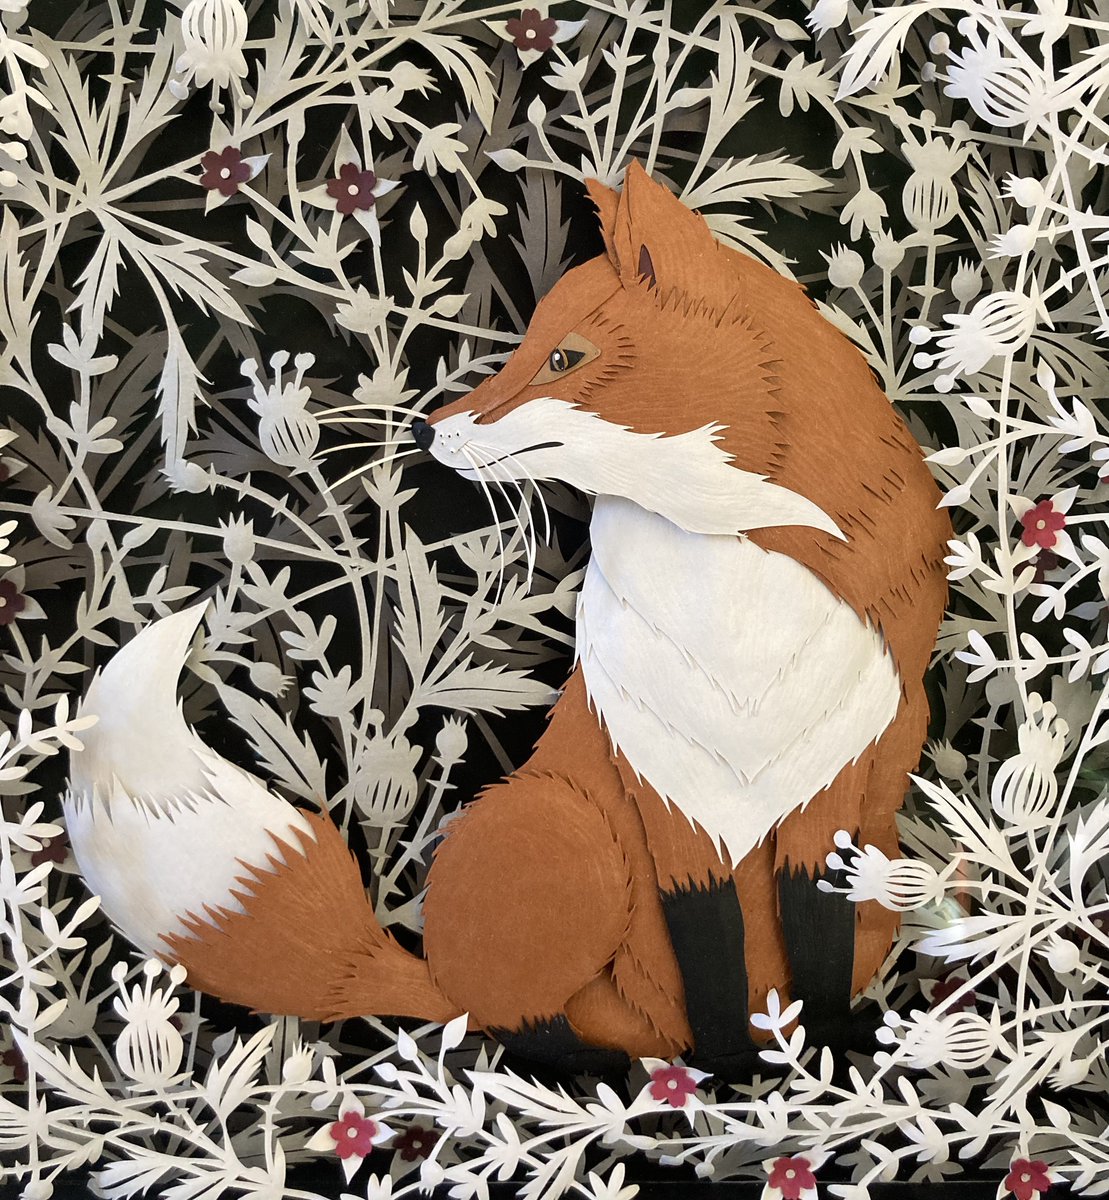 Anna Cook Paperart will be exhibiting at our next two events at RHS Garden Wisley (2-6 May) and at Hever Castle & Gardens (16-19 May).
#MakerMonday #MondayMaker